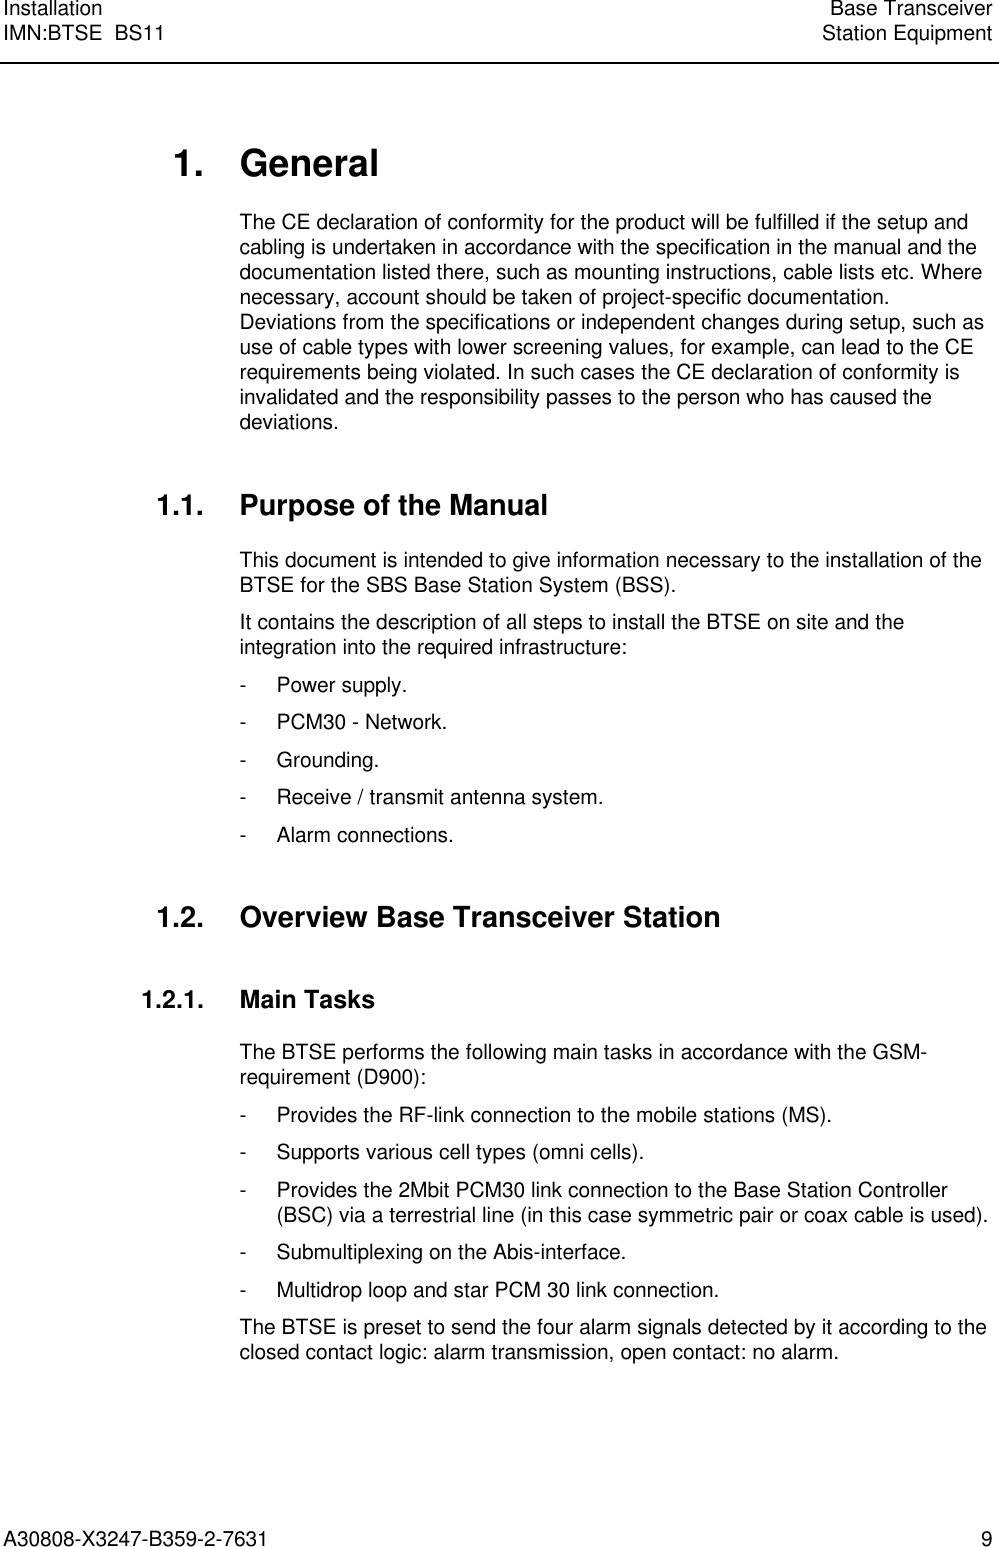 Installation Base TransceiverIMN:BTSE  BS11 Station EquipmentA30808-X3247-B359-2-7631 91. GeneralThe CE declaration of conformity for the product will be fulfilled if the setup andcabling is undertaken in accordance with the specification in the manual and thedocumentation listed there, such as mounting instructions, cable lists etc. Wherenecessary, account should be taken of project-specific documentation.Deviations from the specifications or independent changes during setup, such asuse of cable types with lower screening values, for example, can lead to the CErequirements being violated. In such cases the CE declaration of conformity isinvalidated and the responsibility passes to the person who has caused thedeviations.1.1. Purpose of the ManualThis document is intended to give information necessary to the installation of theBTSE for the SBS Base Station System (BSS).It contains the description of all steps to install the BTSE on site and theintegration into the required infrastructure:- Power supply.- PCM30 - Network.- Grounding.- Receive / transmit antenna system.- Alarm connections.1.2. Overview Base Transceiver Station1.2.1. Main TasksThe BTSE performs the following main tasks in accordance with the GSM-requirement (D900):- Provides the RF-link connection to the mobile stations (MS).- Supports various cell types (omni cells).- Provides the 2Mbit PCM30 link connection to the Base Station Controller(BSC) via a terrestrial line (in this case symmetric pair or coax cable is used).- Submultiplexing on the Abis-interface.- Multidrop loop and star PCM 30 link connection.The BTSE is preset to send the four alarm signals detected by it according to theclosed contact logic: alarm transmission, open contact: no alarm.